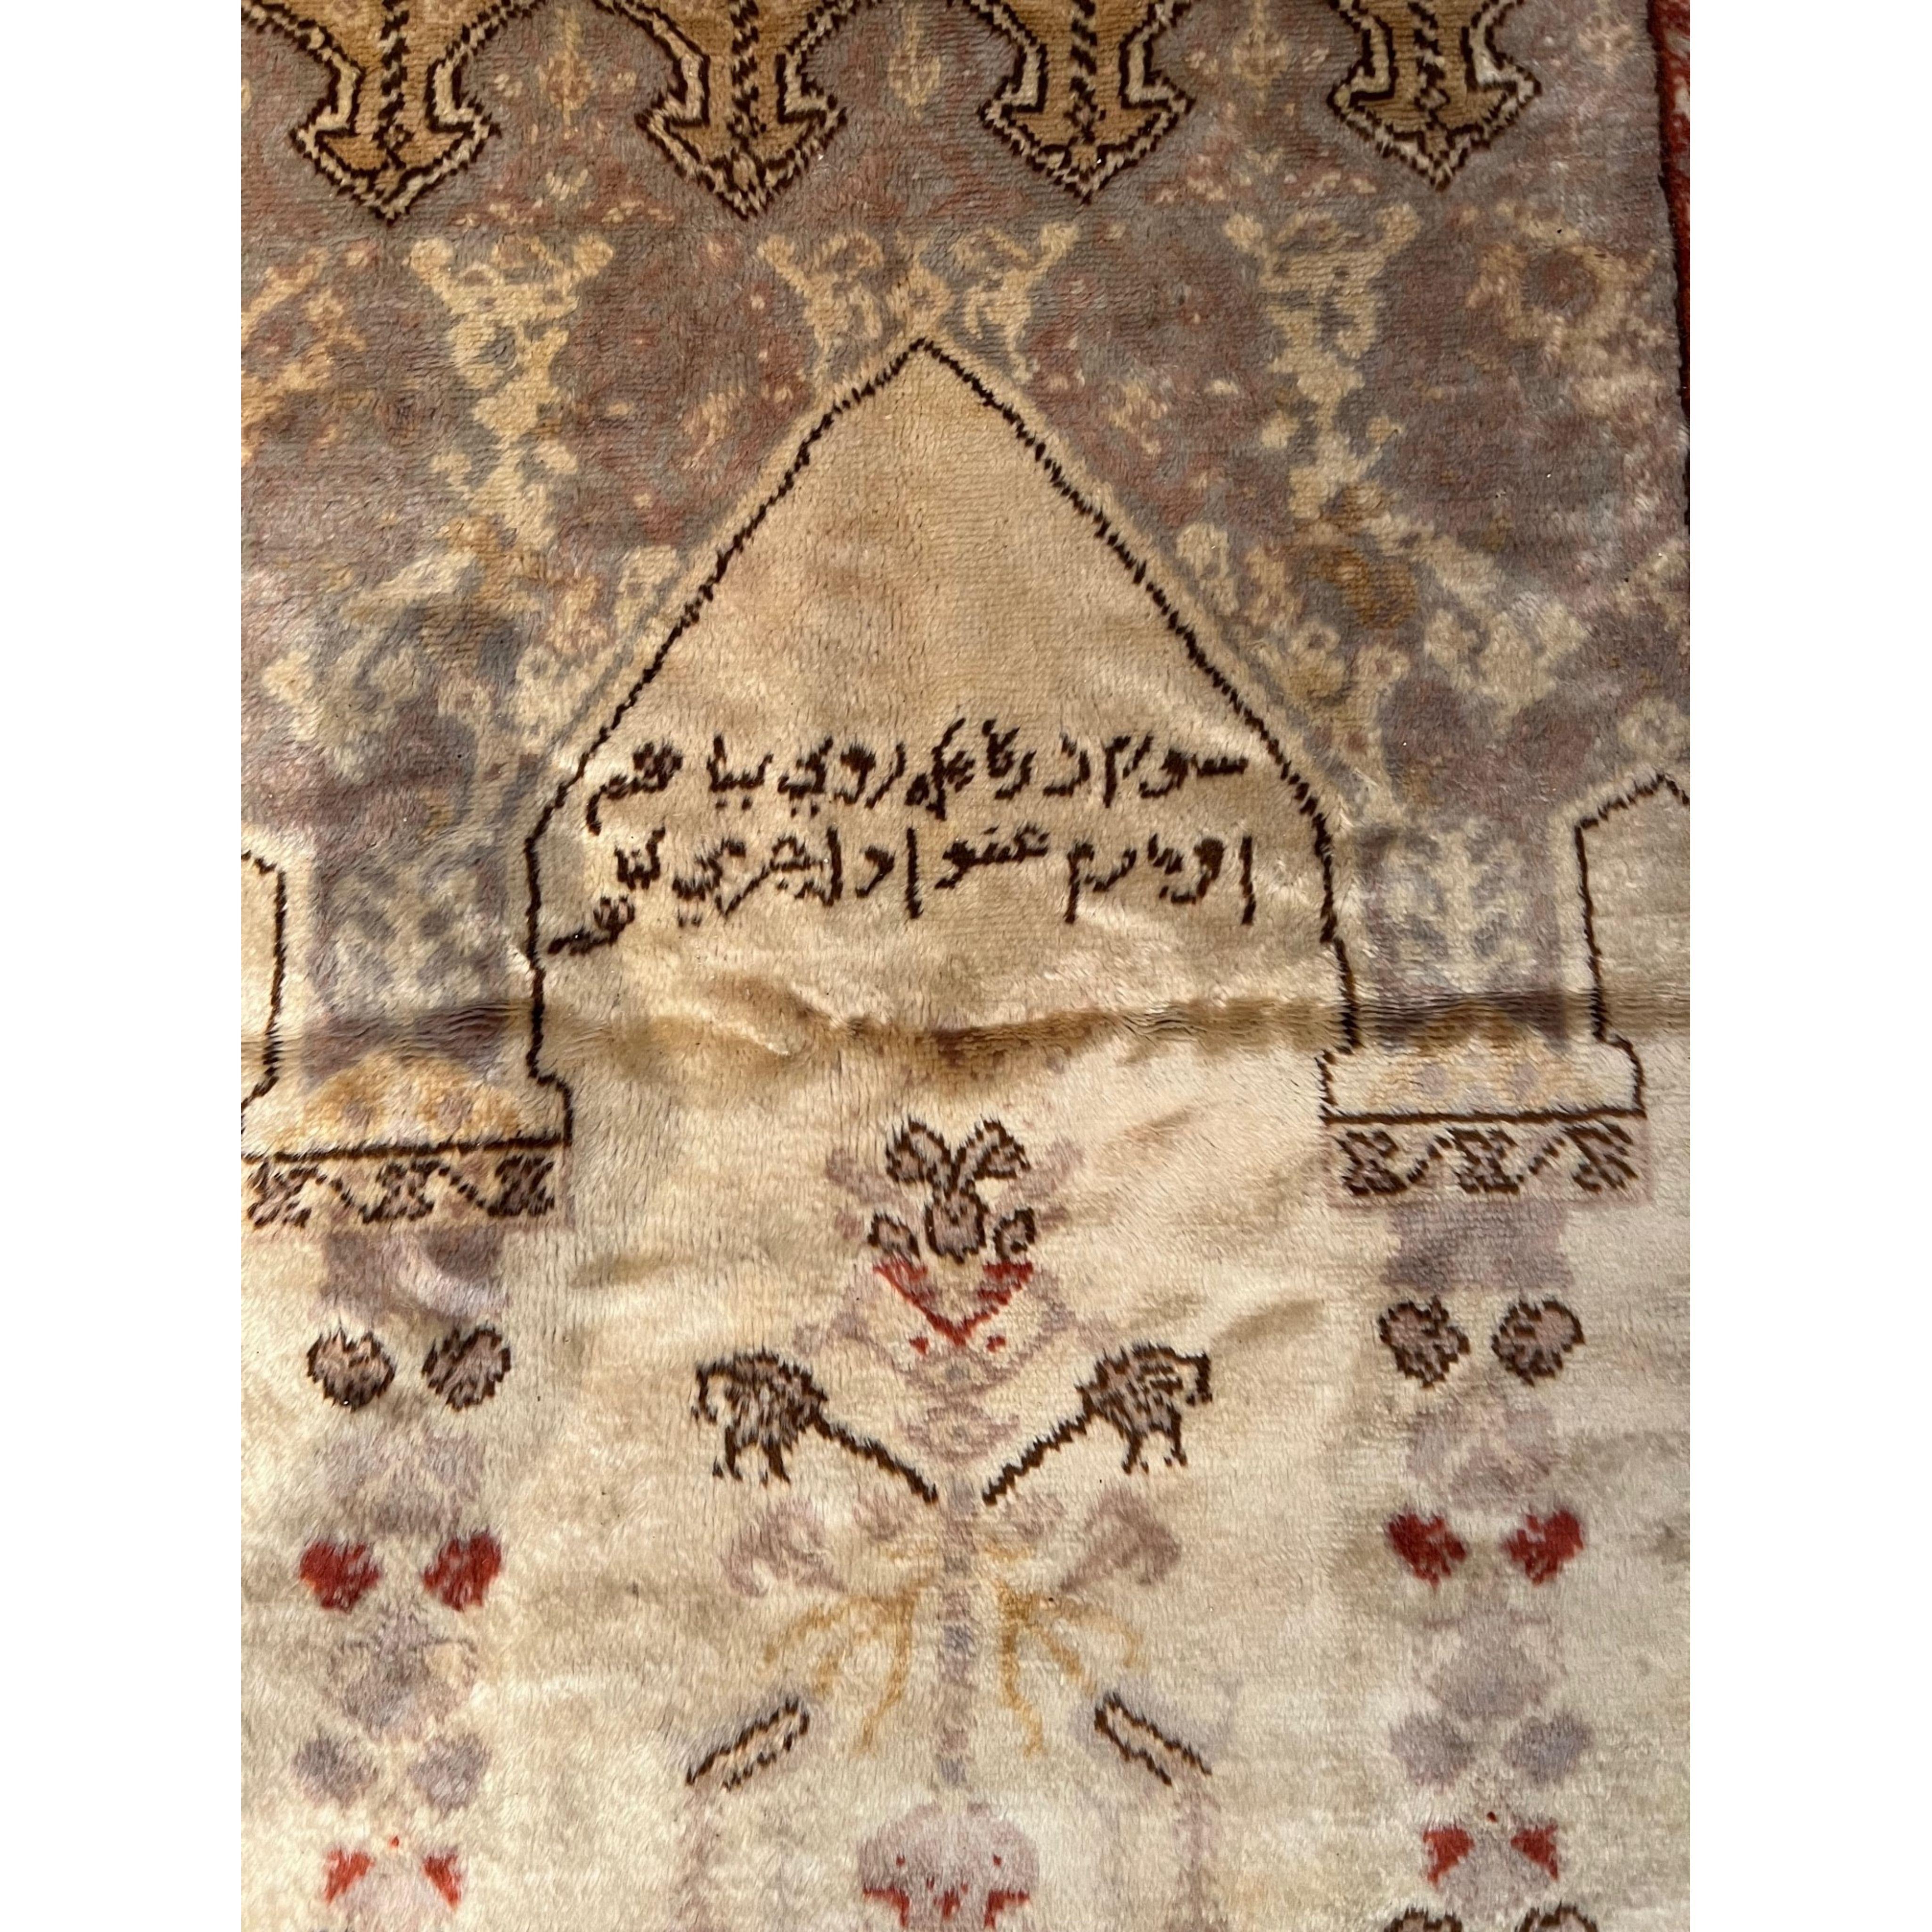 Turkish rugs (also referred to as Anatolian rugs) are, arguably, the rugs that started it all. These carpets were among the first wave of Oriental antique carpets to be exported into Europe. The vintage Turkish rugs were prized commodities and